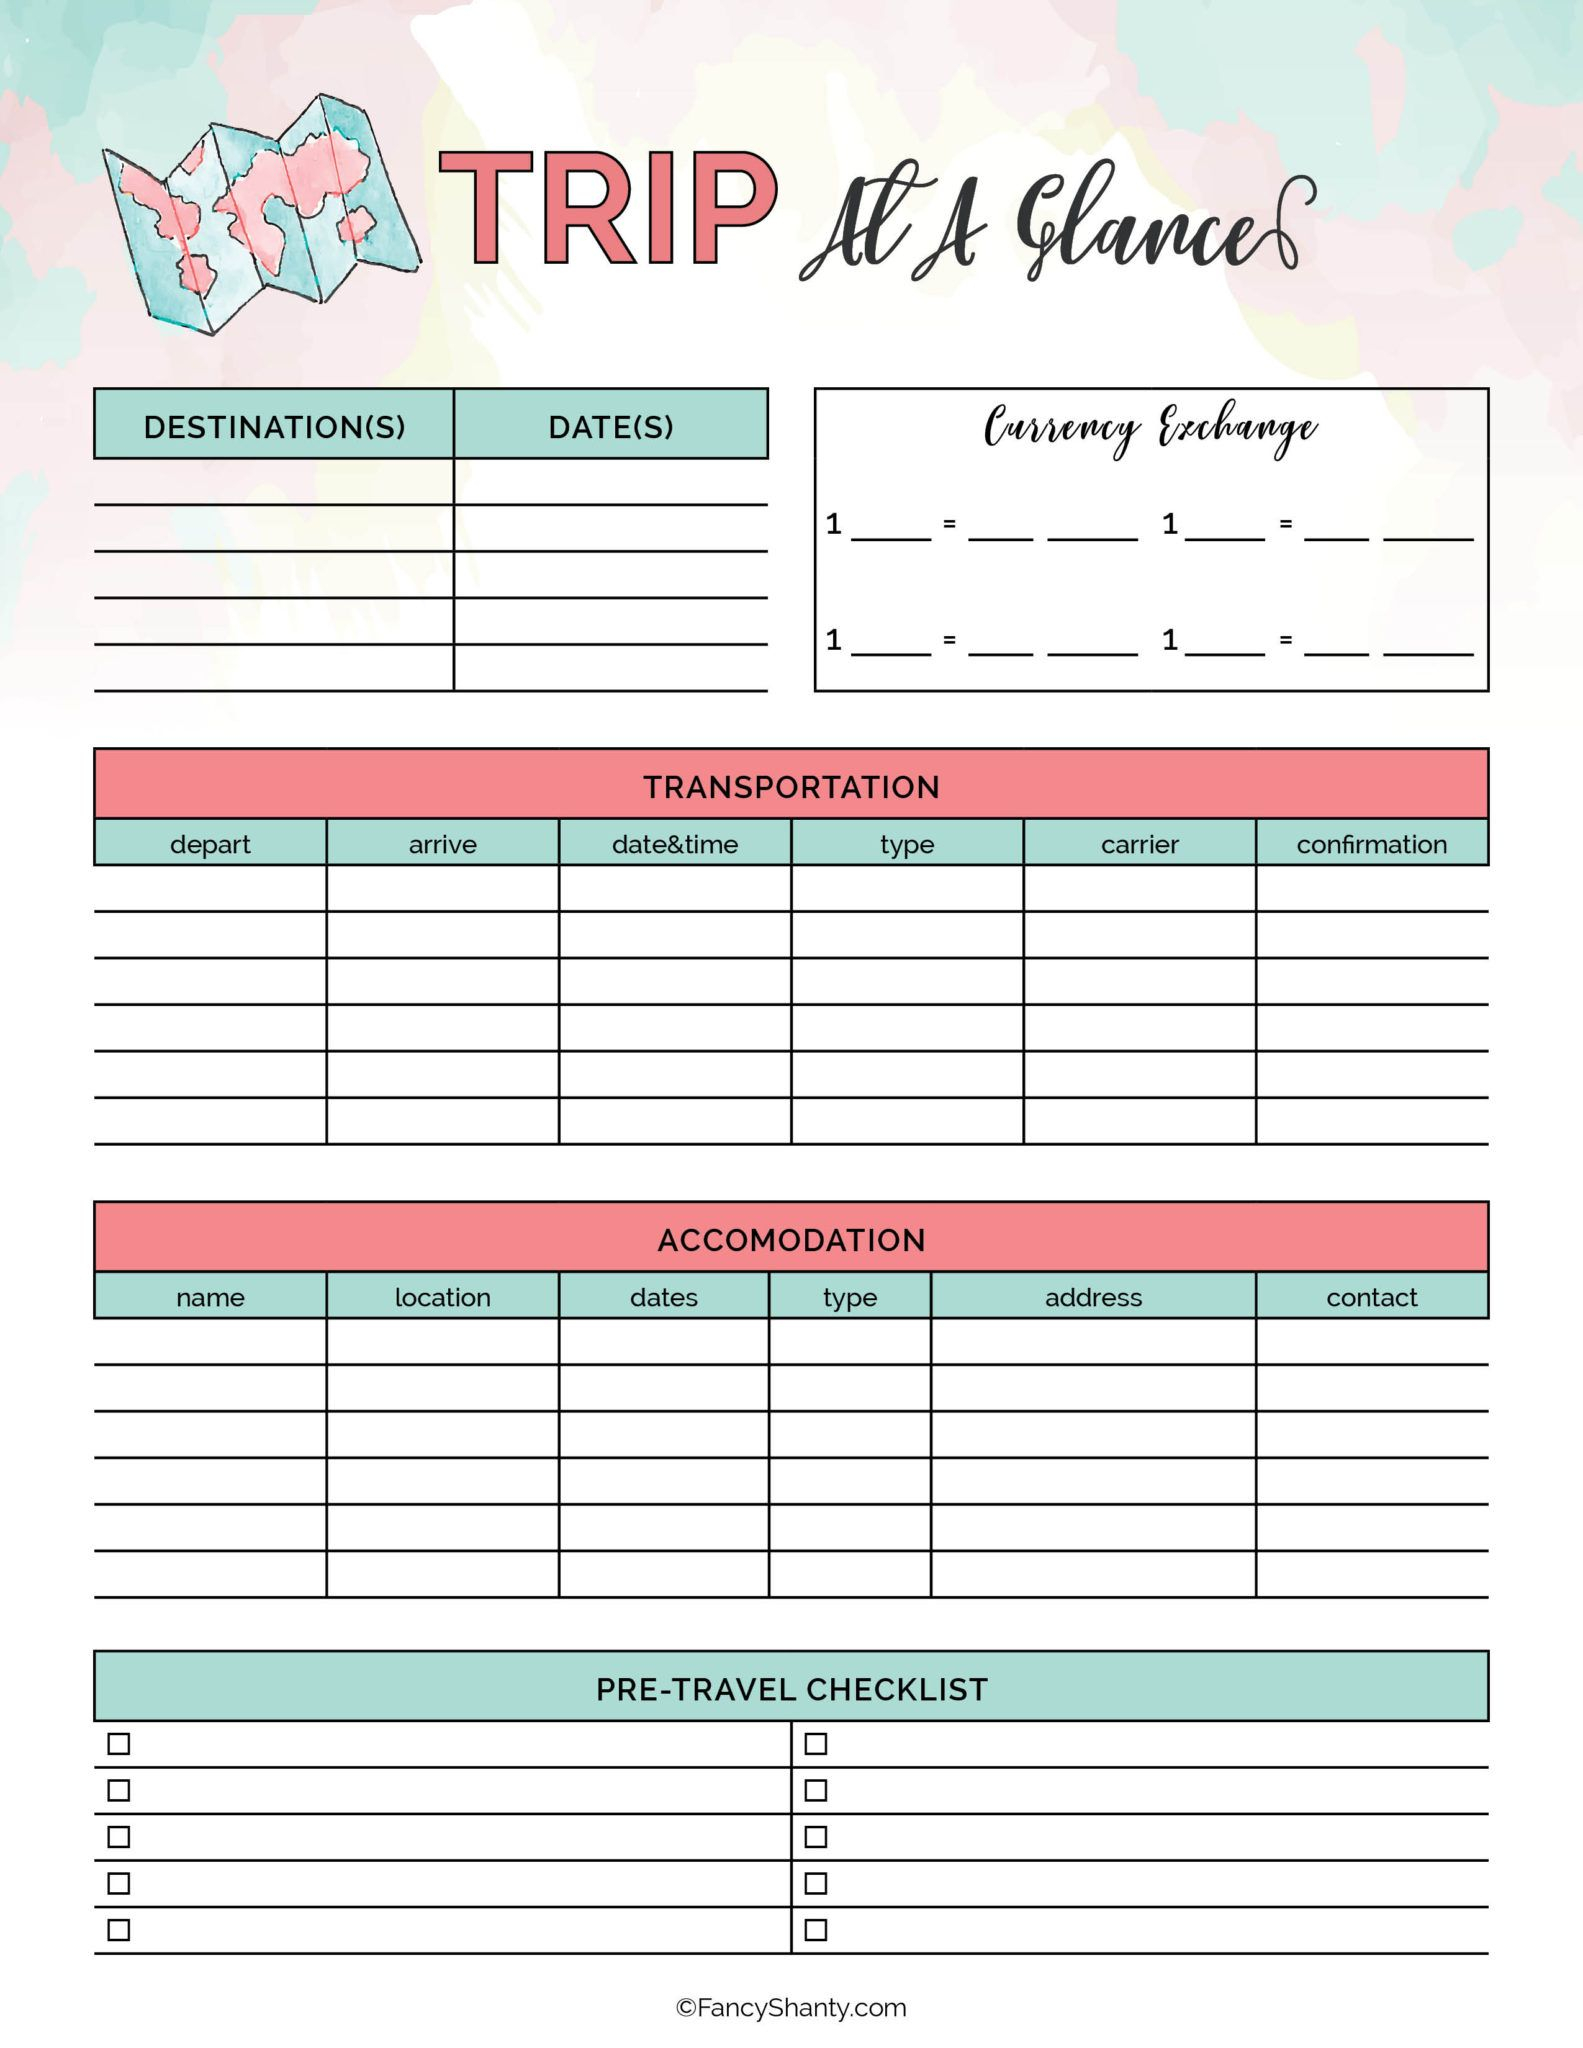 Free Itinerary Templates Smartsheet Weekly Vacation Planner  Pertaining To Travel Planner Itinerary Template With Travel Planner Itinerary Template